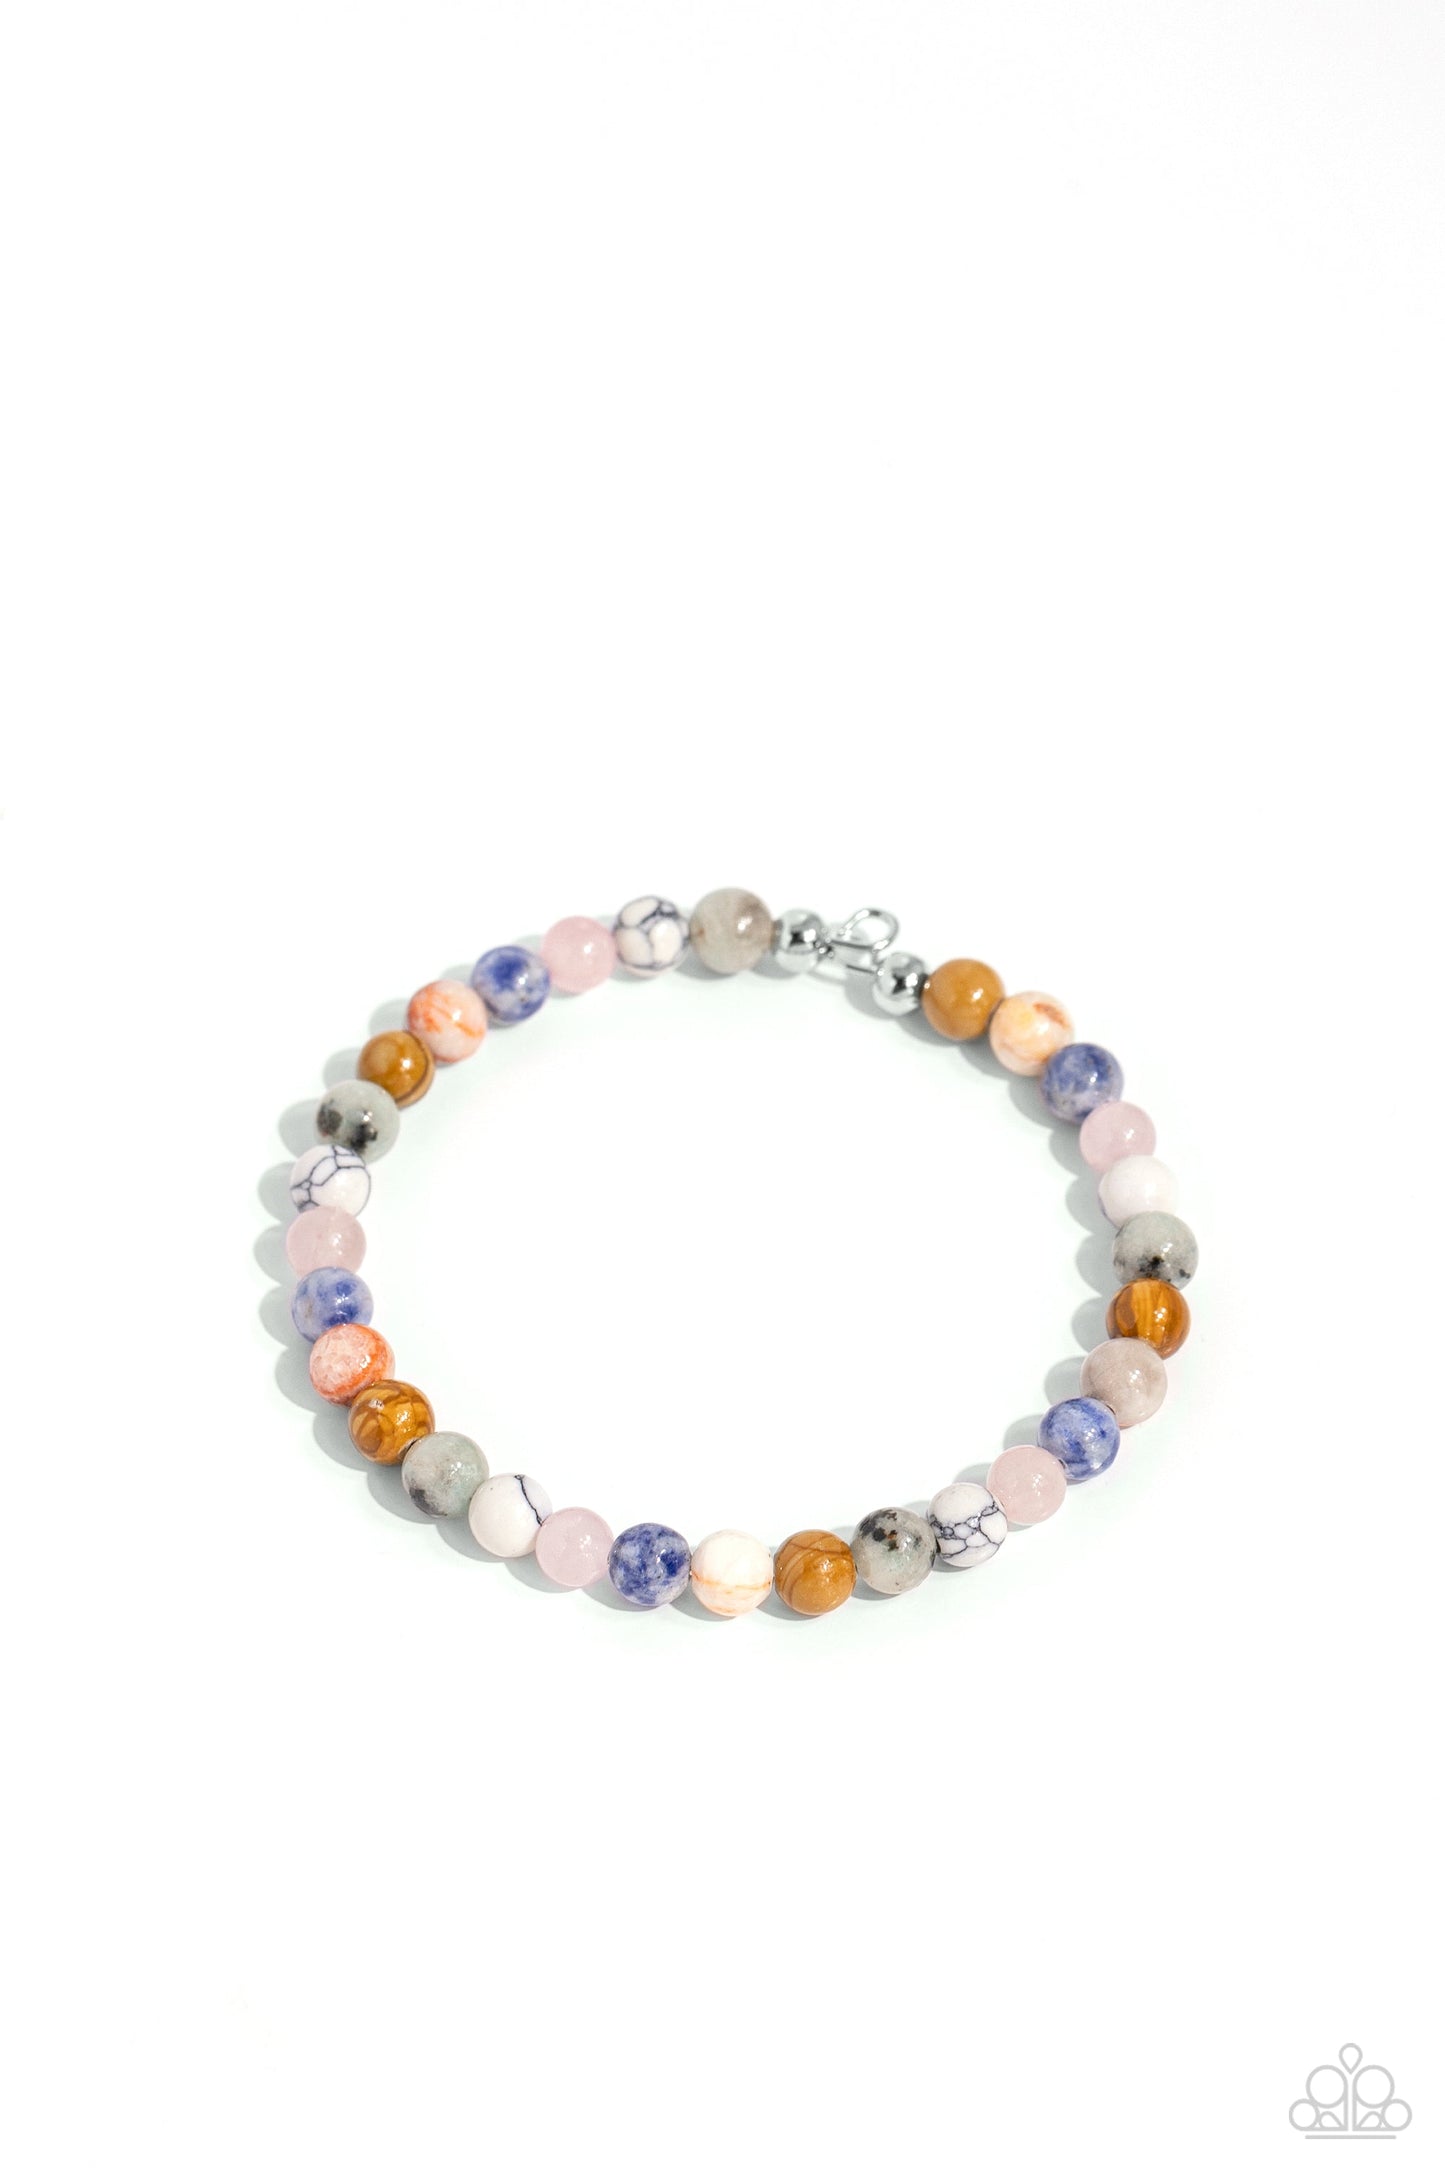 Sinuous Stones - Multi Color Bracelet - Paparazzi Accessories - Multicolored stone beads and two shimmery silver beads are threaded along a coiled wire to create a stackable earthy bracelet.